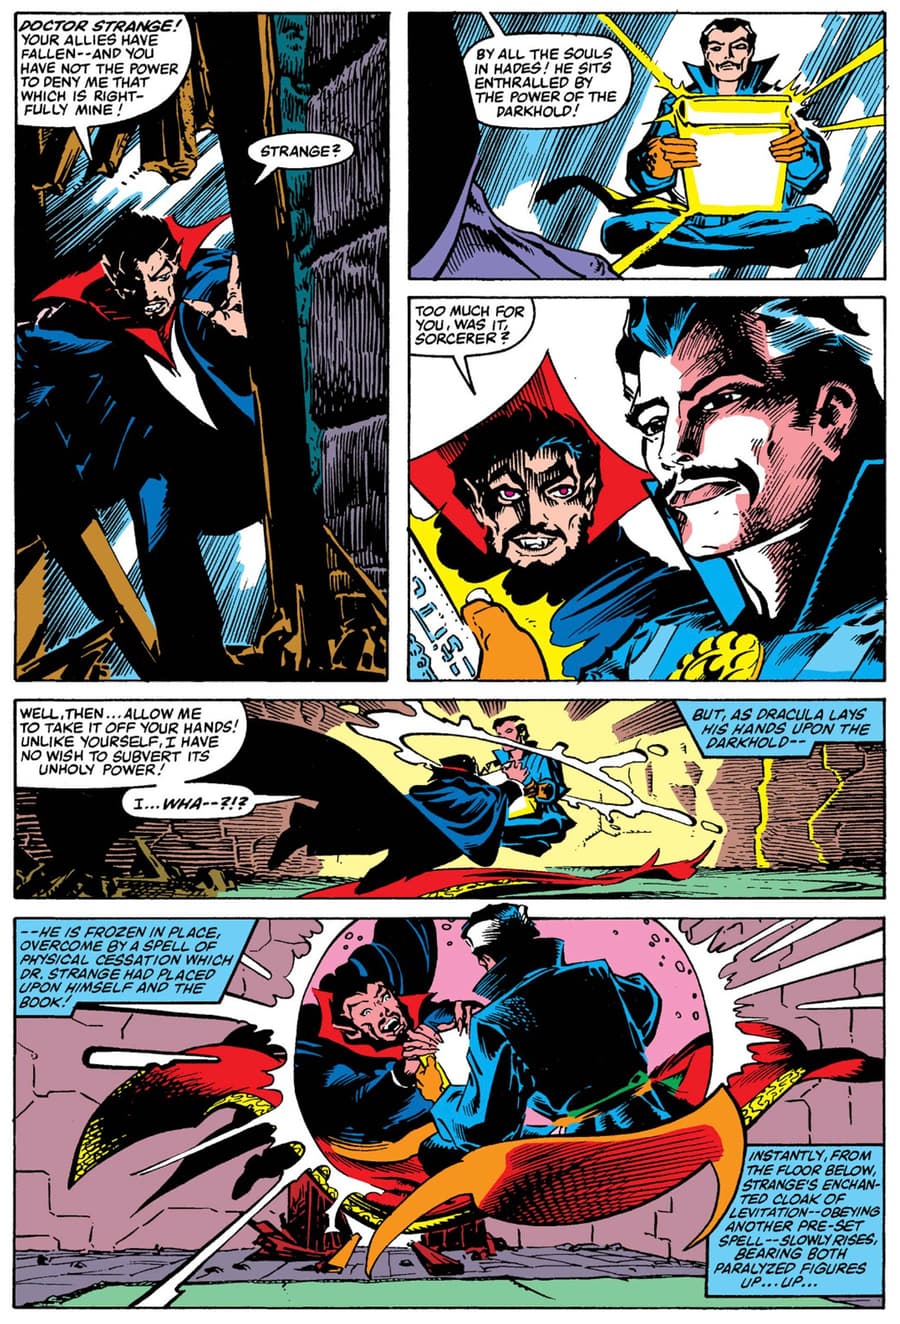 DOCTOR STRANGE (1974) #62 page by Roger Stern and Steve Leialoha